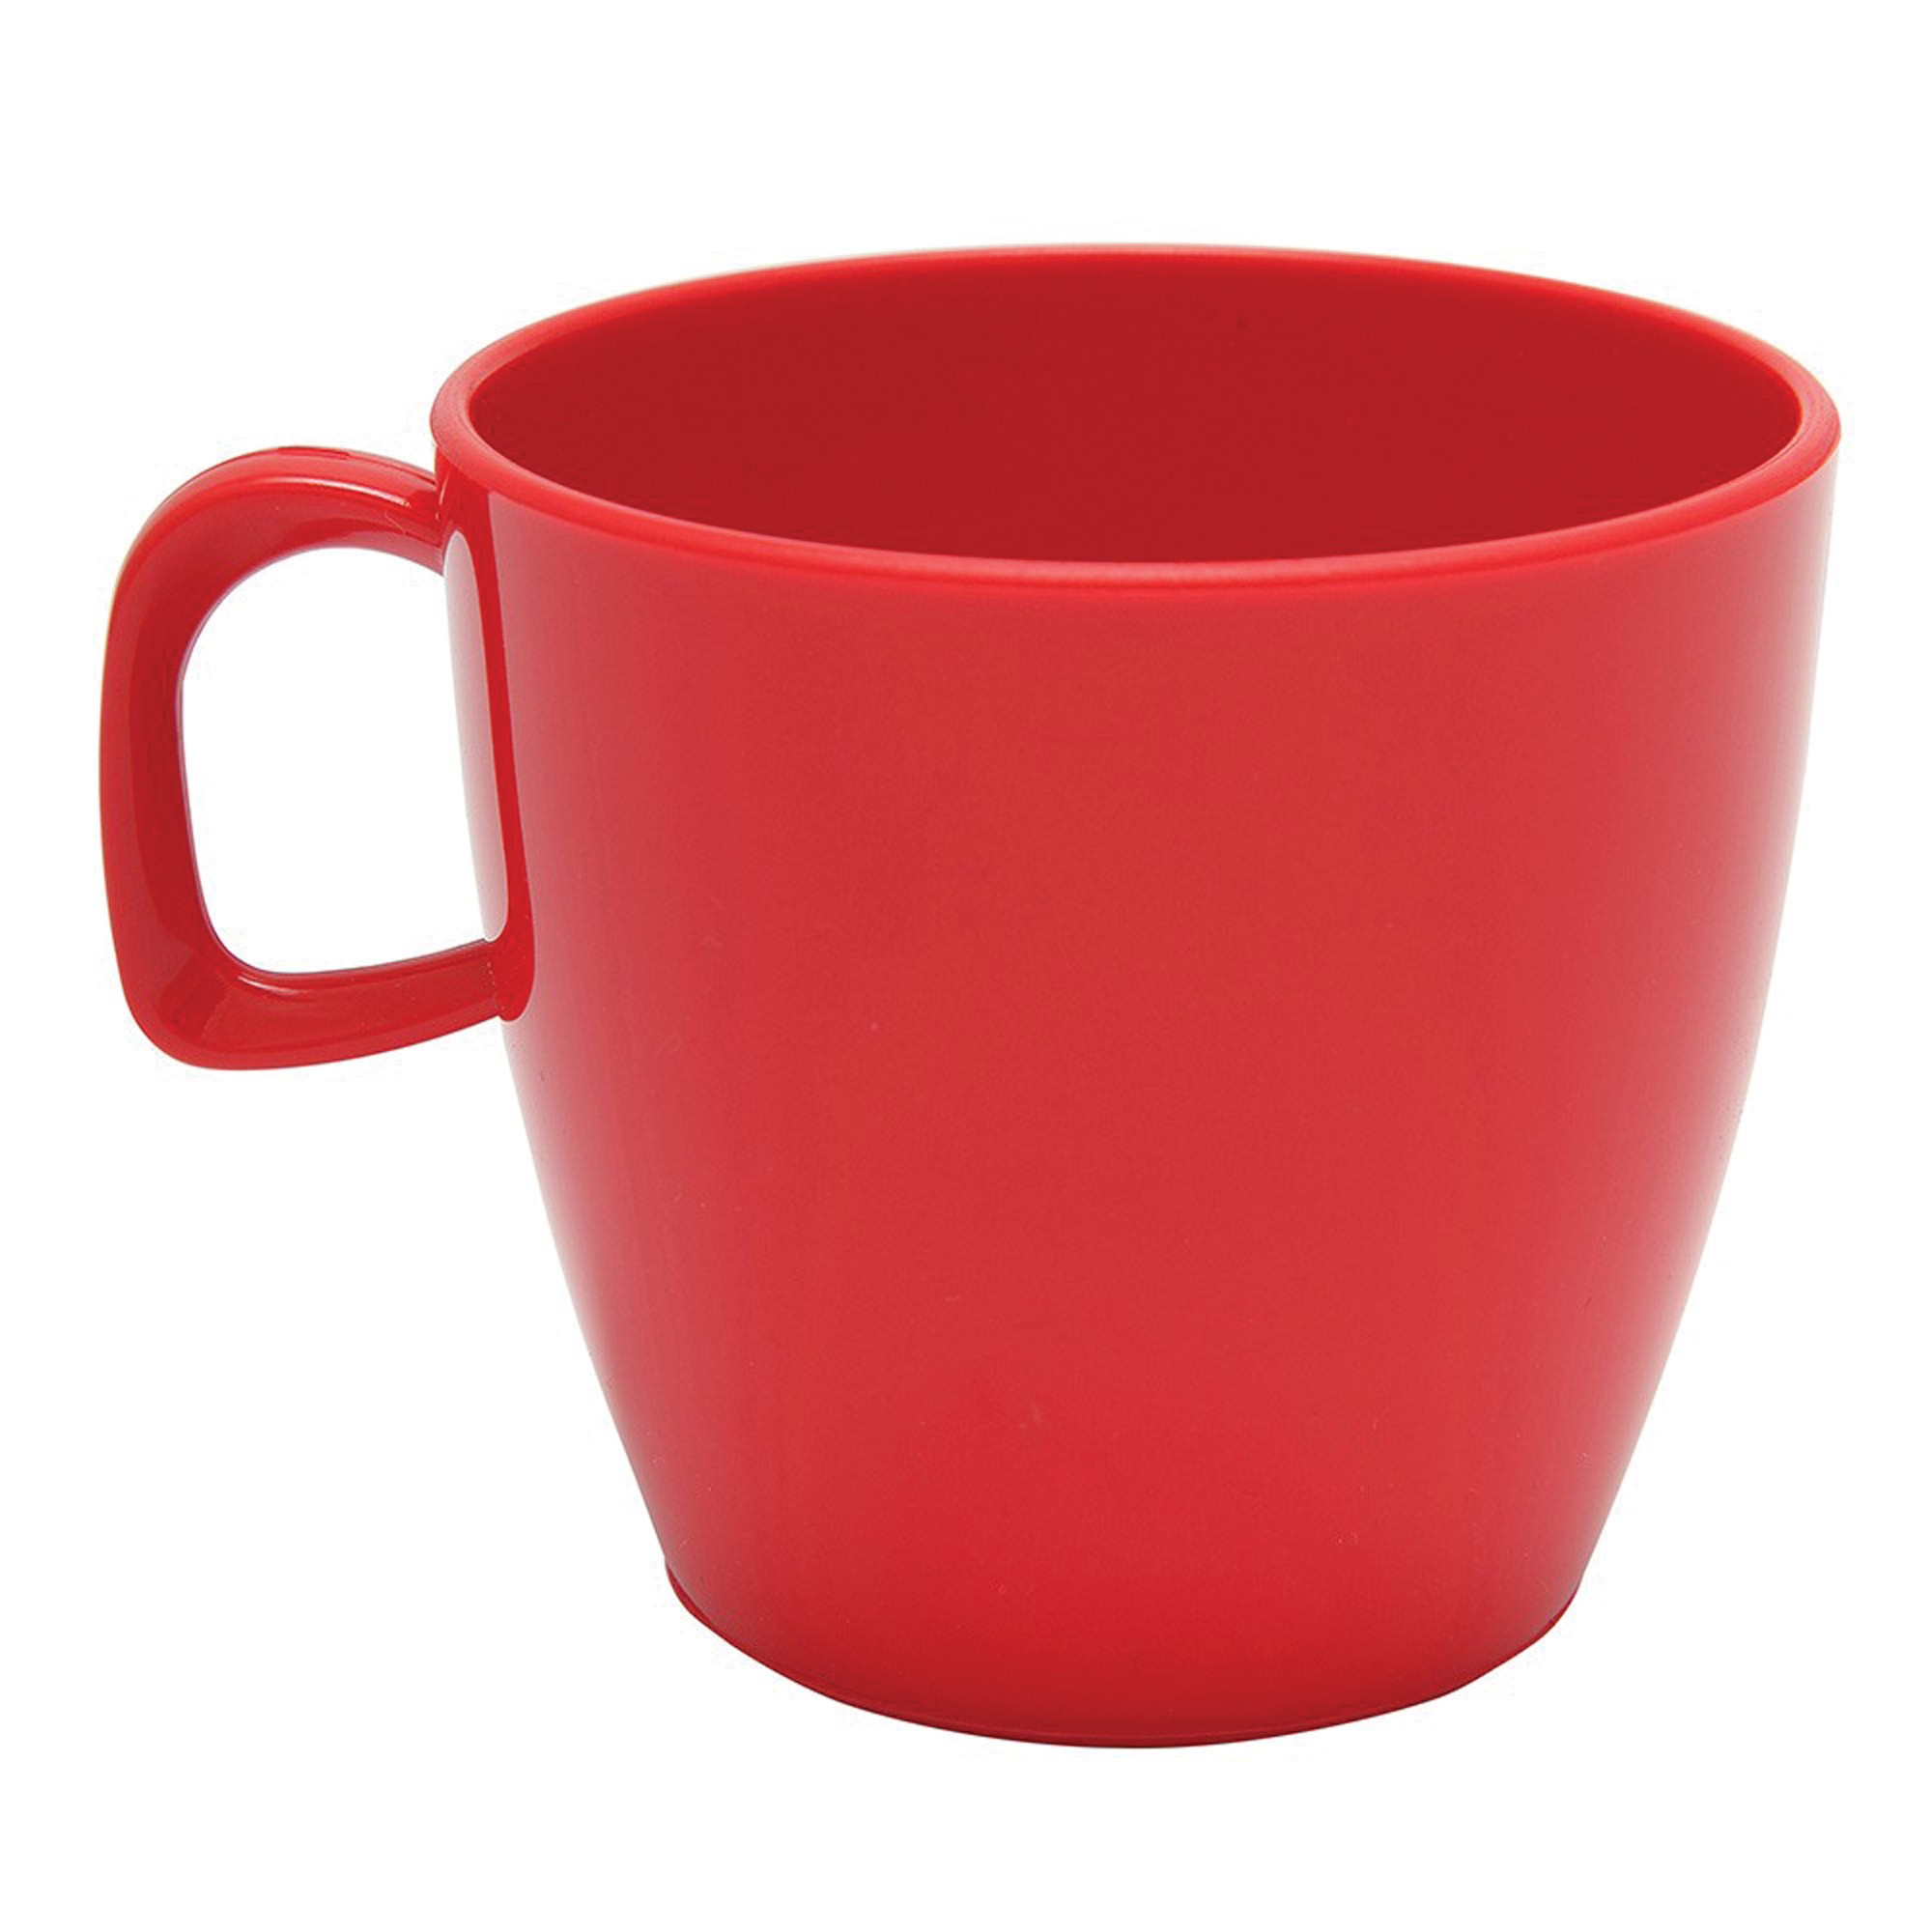 Polycarbonate Tea Cup Red - Each